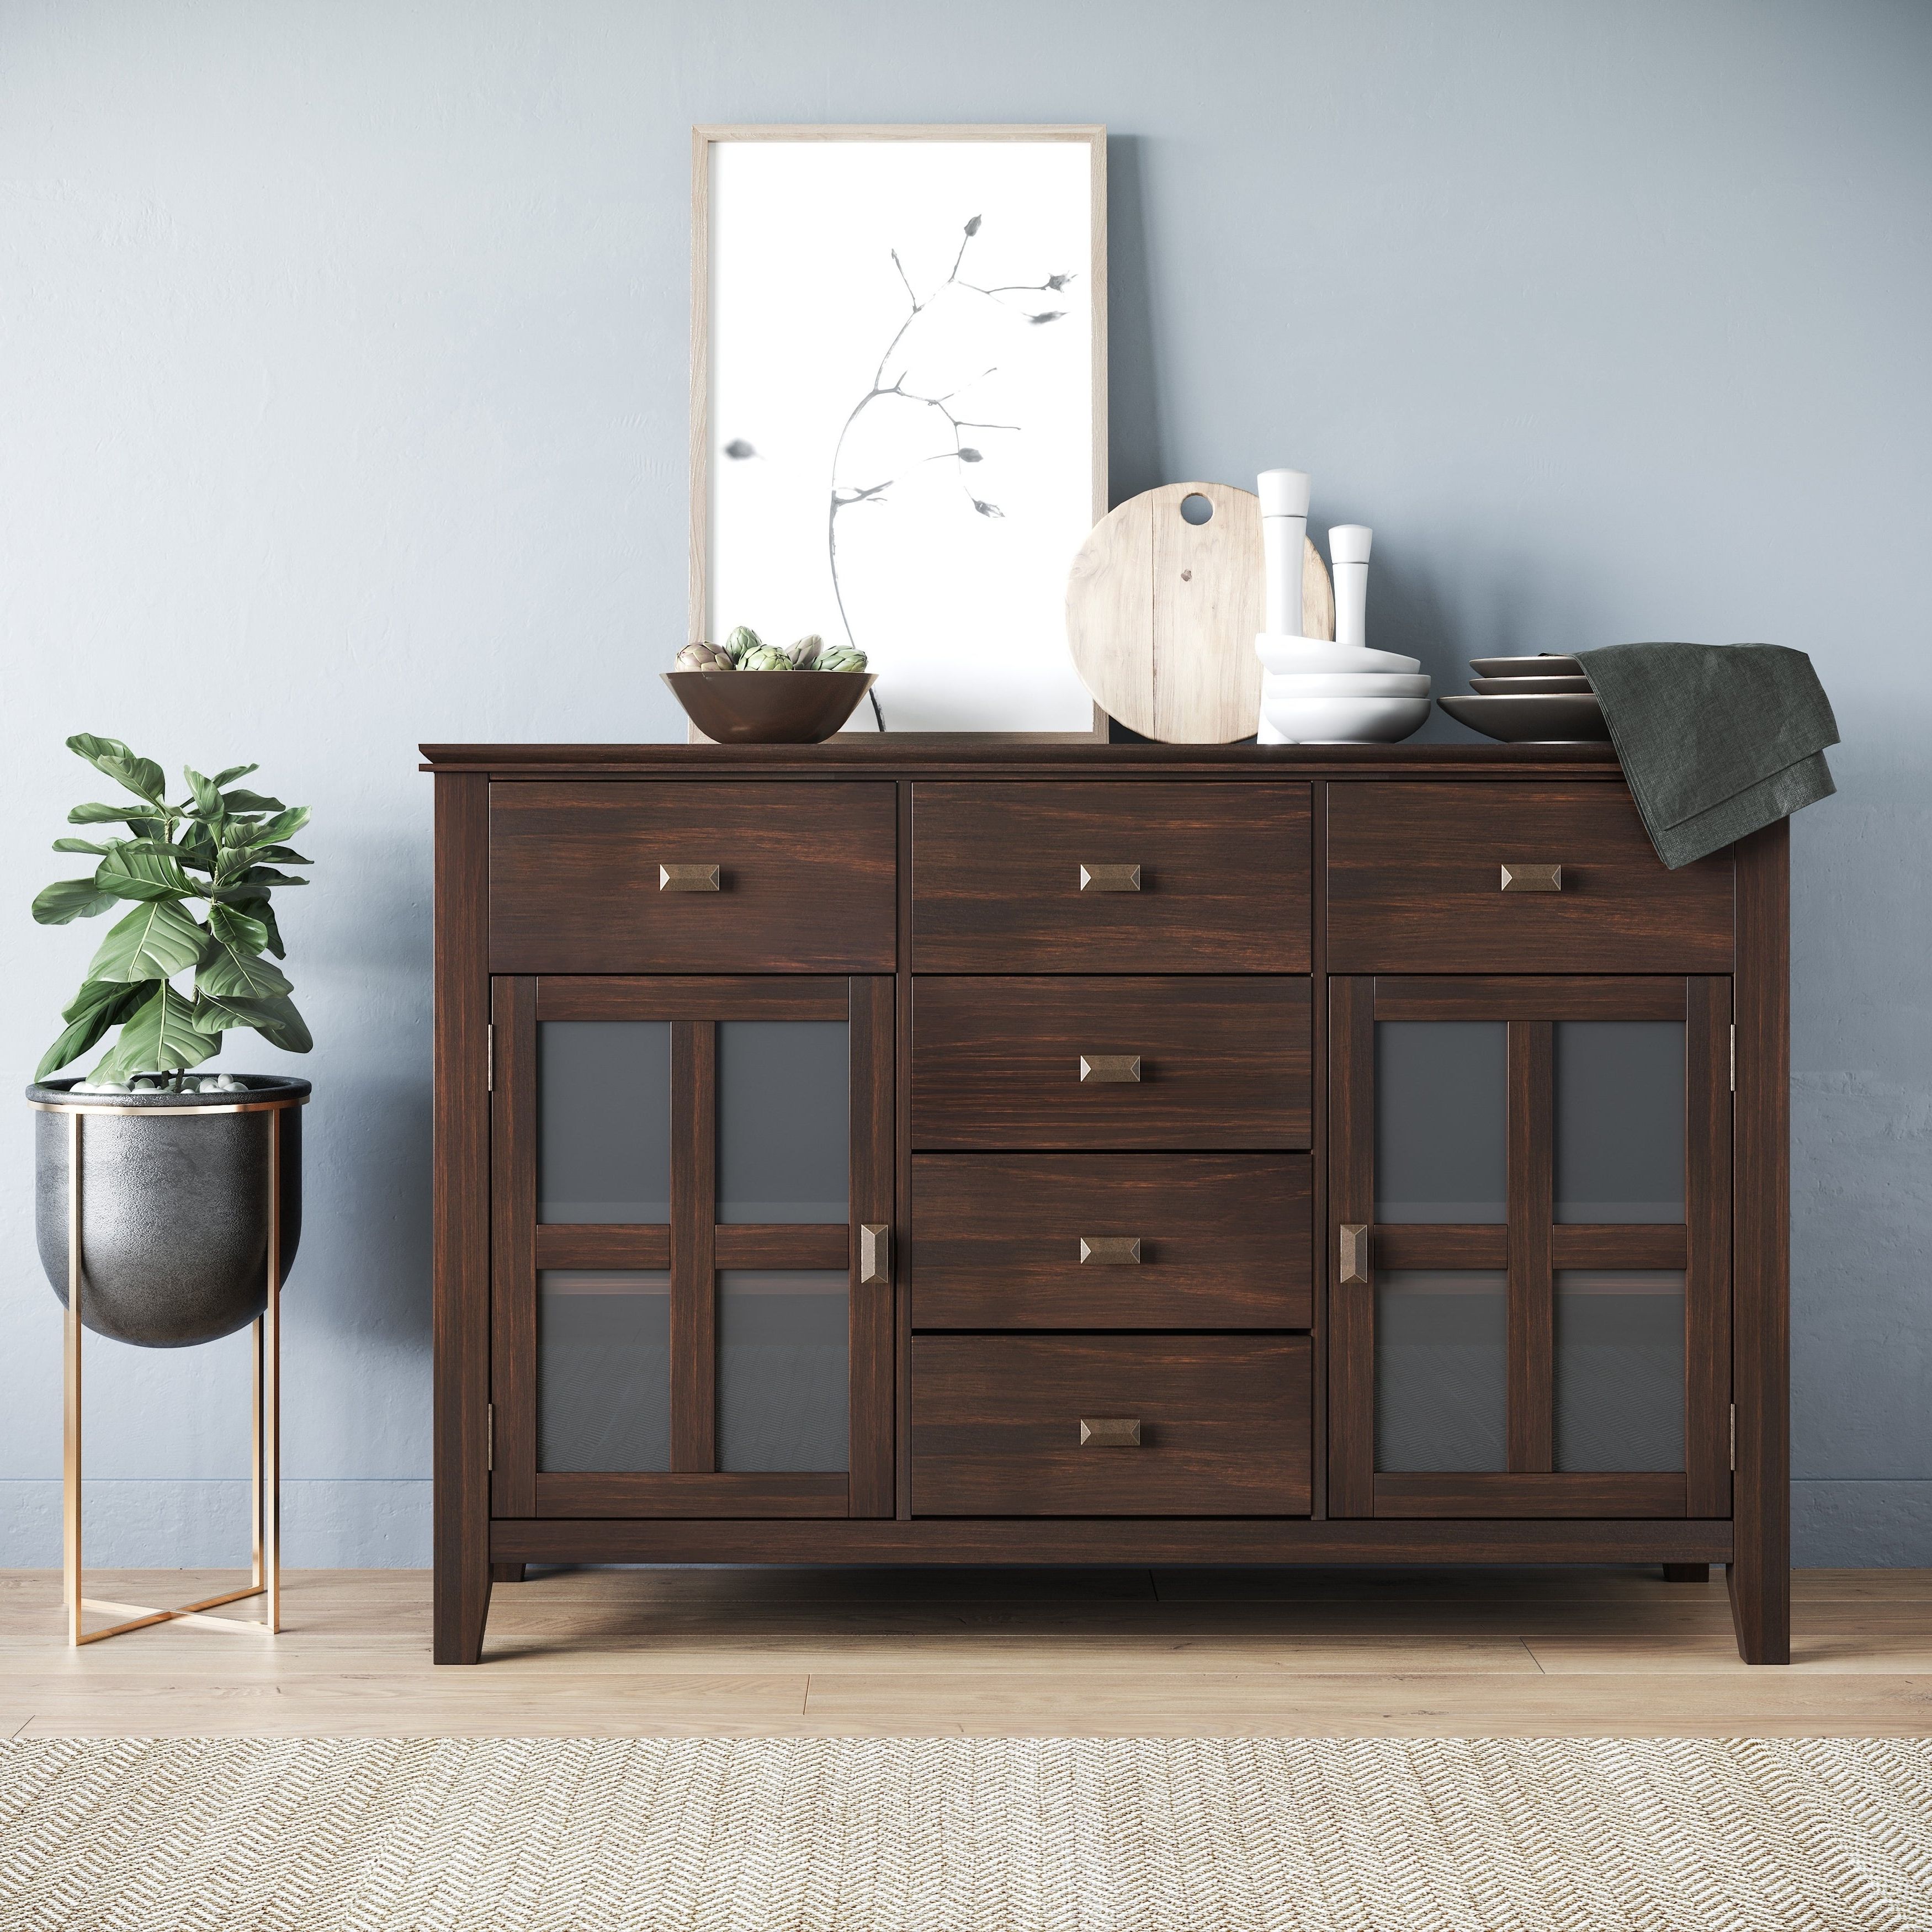 Stratford Solid Wood 54 Inch Wide Contemporary Sideboard Buffet In Dark  Chestnut Brown –  (View 11 of 20)